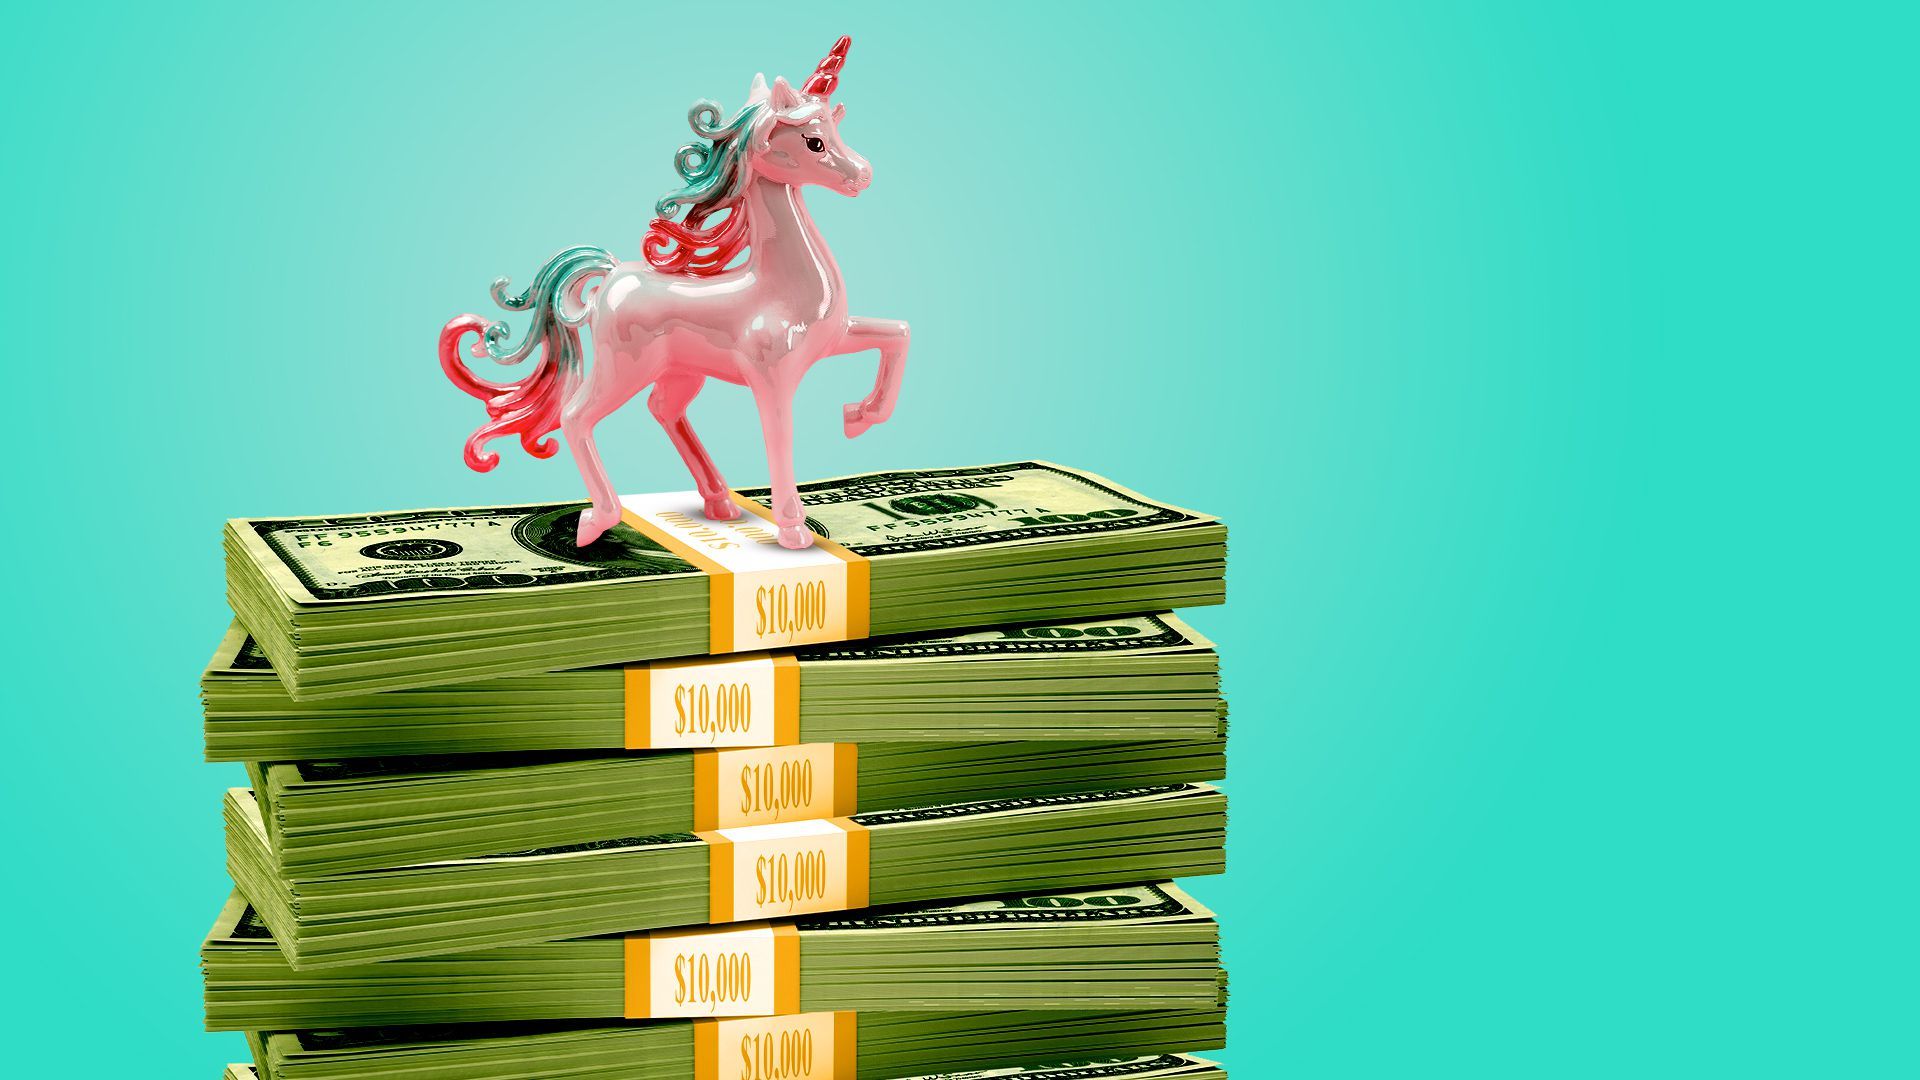 Illustration of a unicorn statue on top of a stack of cash.  